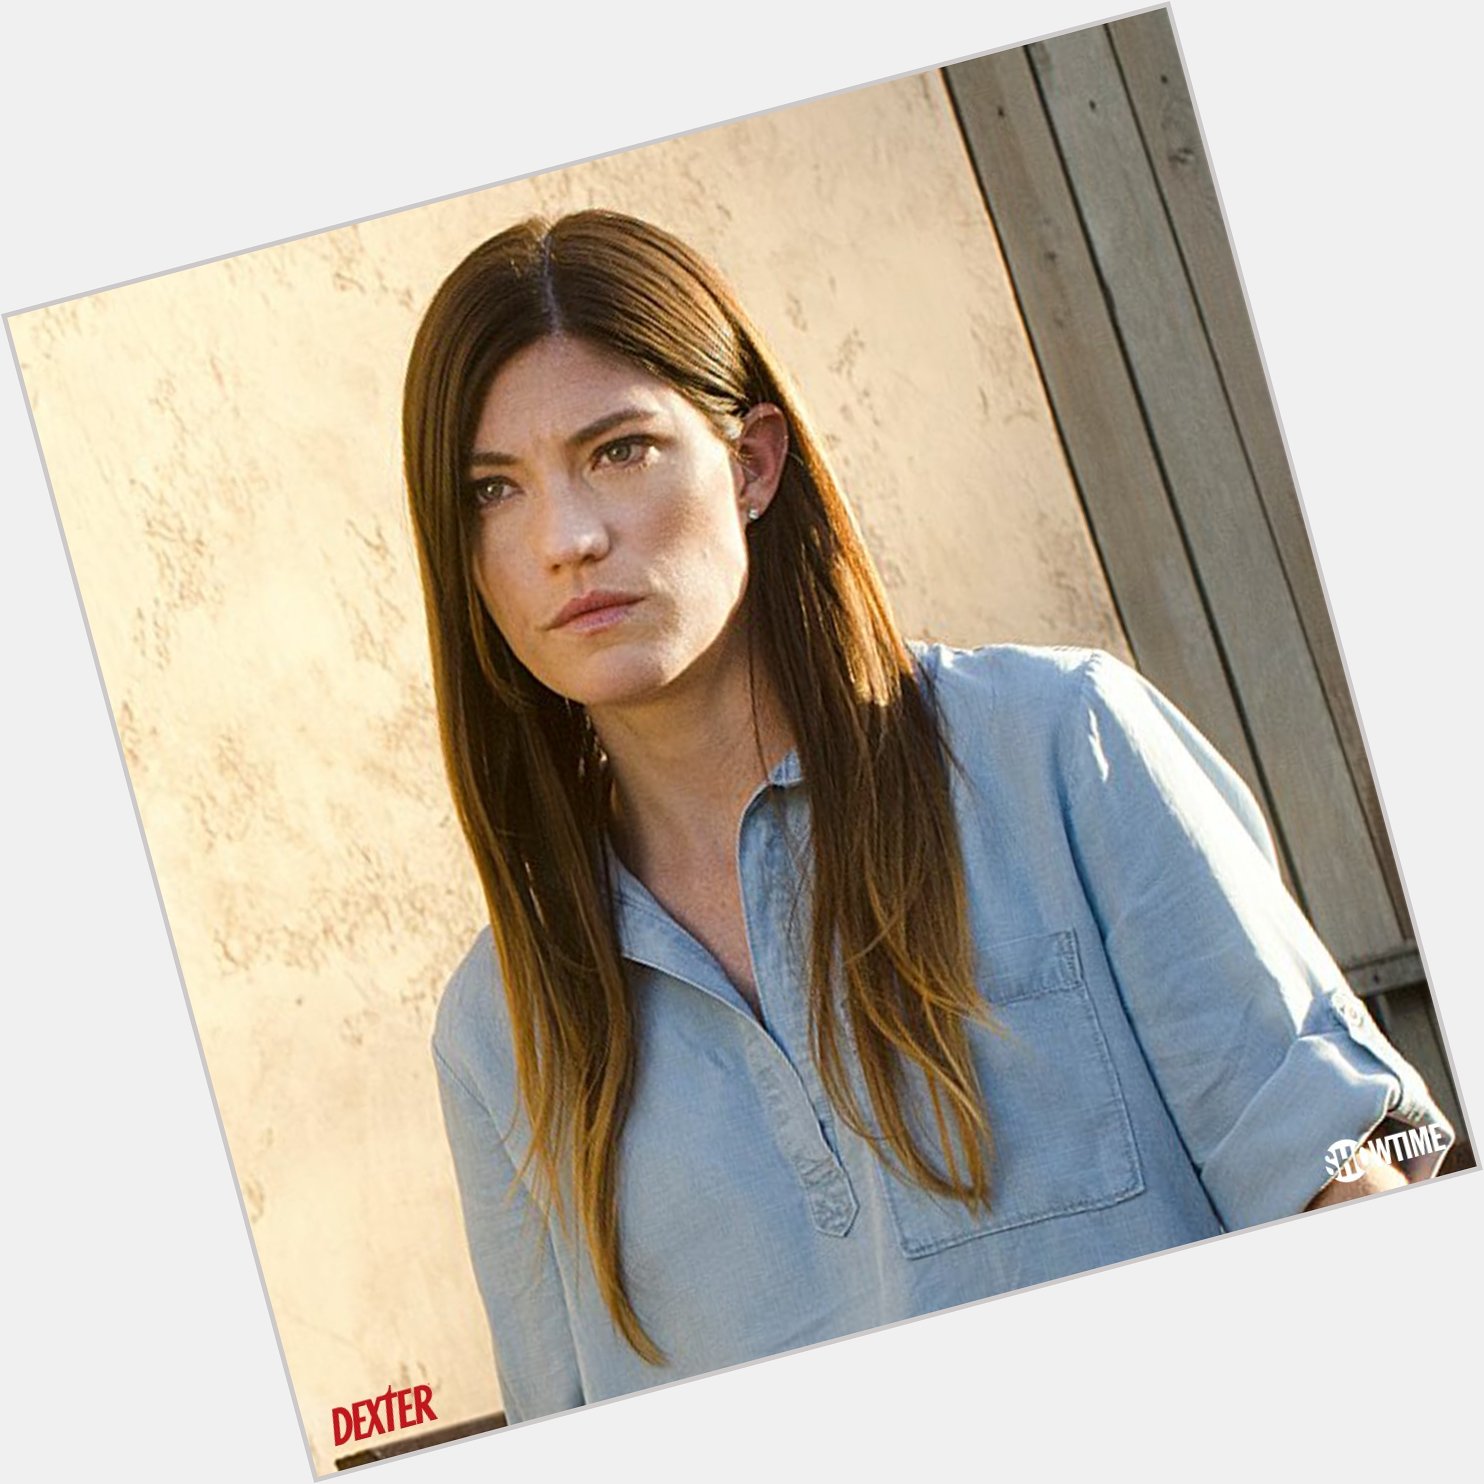 Please join us in wishing Jennifer Carpenter a very Happy Birthday! We hope you have a killer day. 